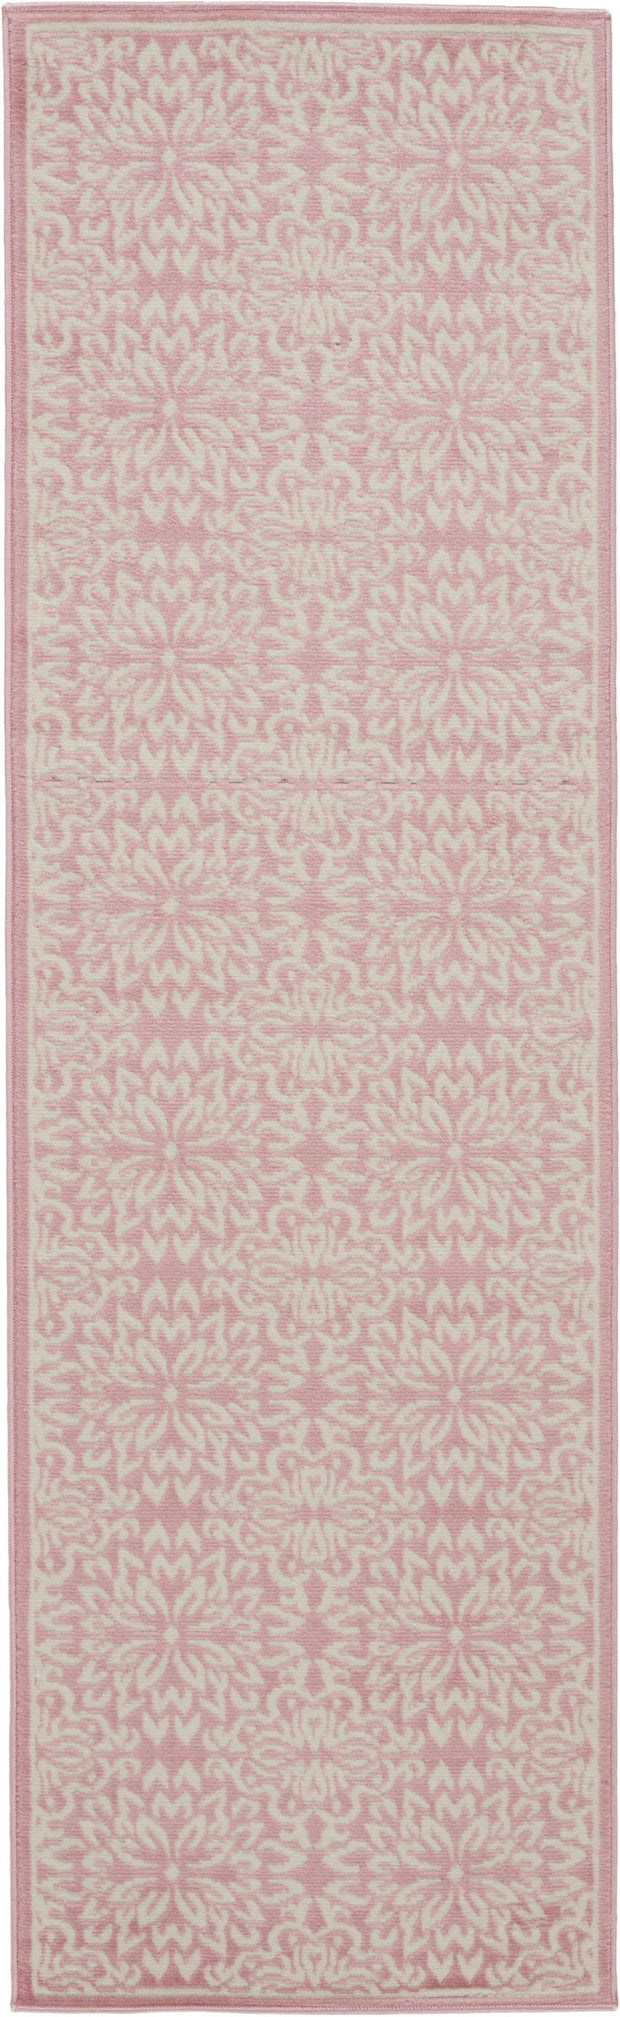 jubilant ivory pink rug by nourison 99446478511 redo 3